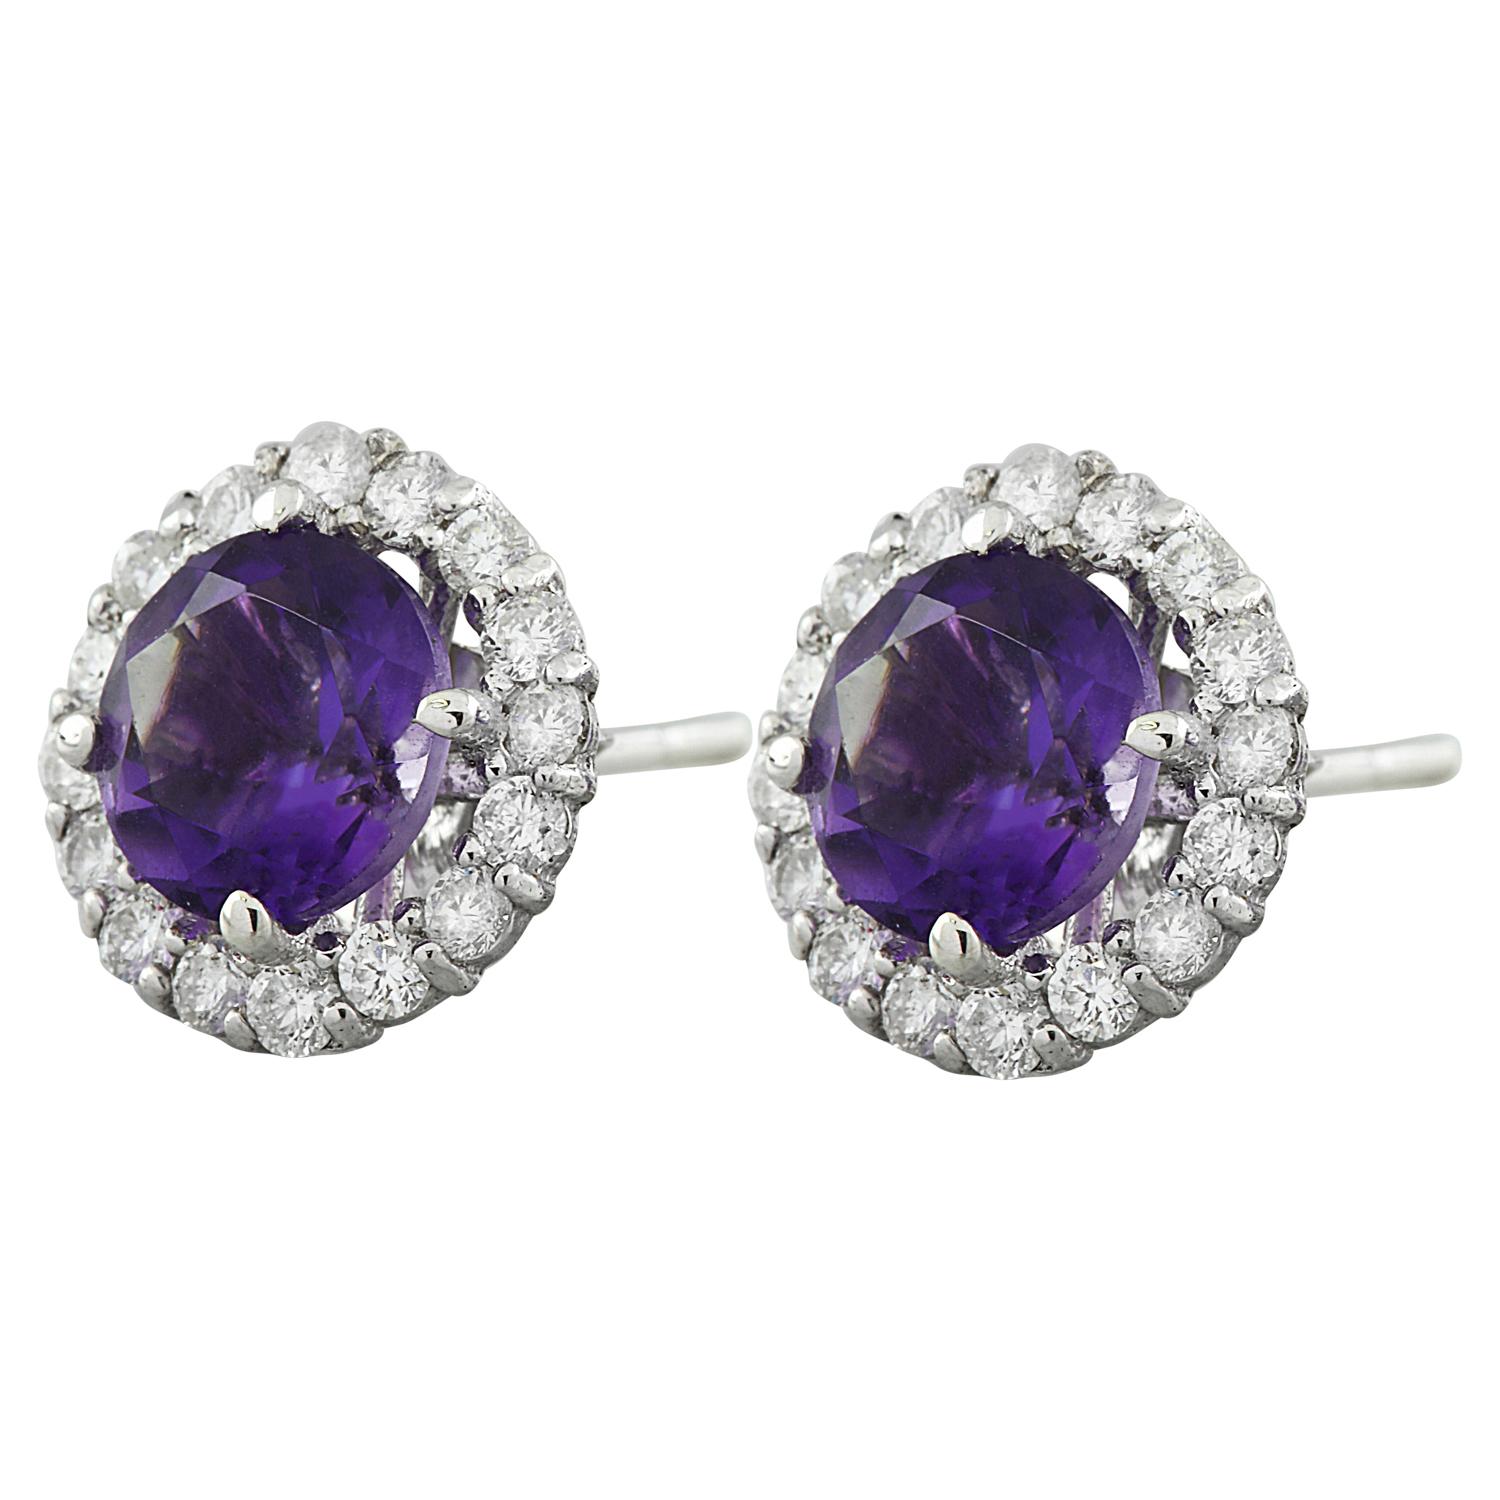 3.65 Carat Natural Amethyst 14 Karat Solid White Gold Diamond Earrings
Stamped: 14K 
Total Earrings Weight: 1.5 Grams 
Amethyst Weight: 3.00 Carat (7.00x7.00 Millimeters)  
Quantity: 2
Diamond Weight: 0.65 Carat (F-G Color, VS2-SI1